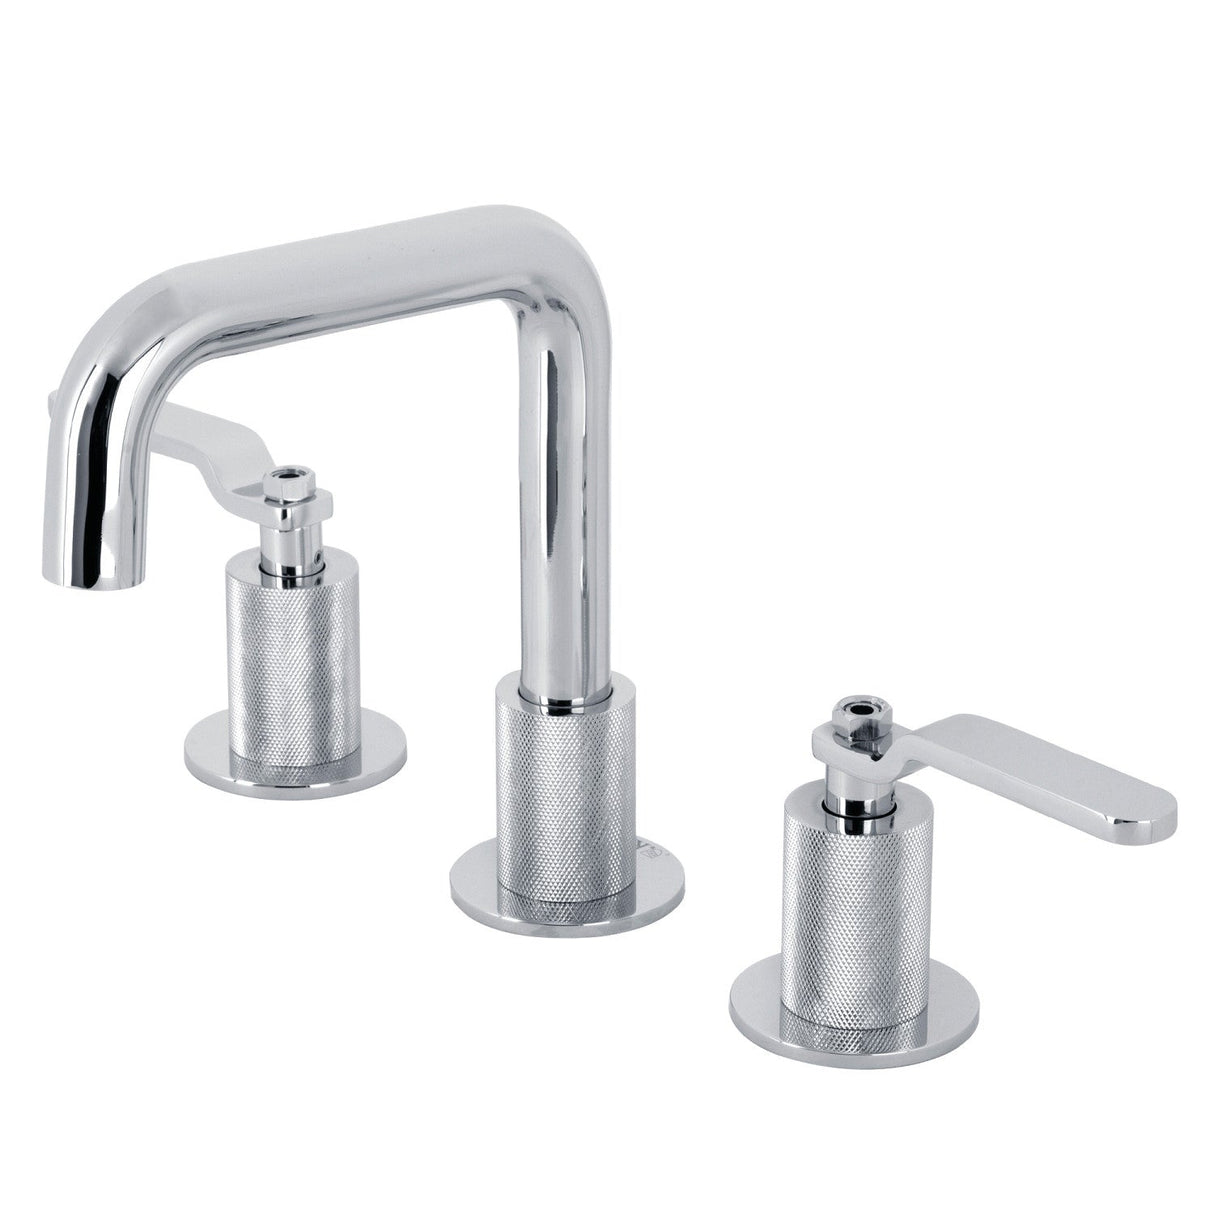 Whitaker KS1411KL Two-Handle 3-Hole Deck Mount Widespread Bathroom Faucet with Push Pop-Up, Polished Chrome